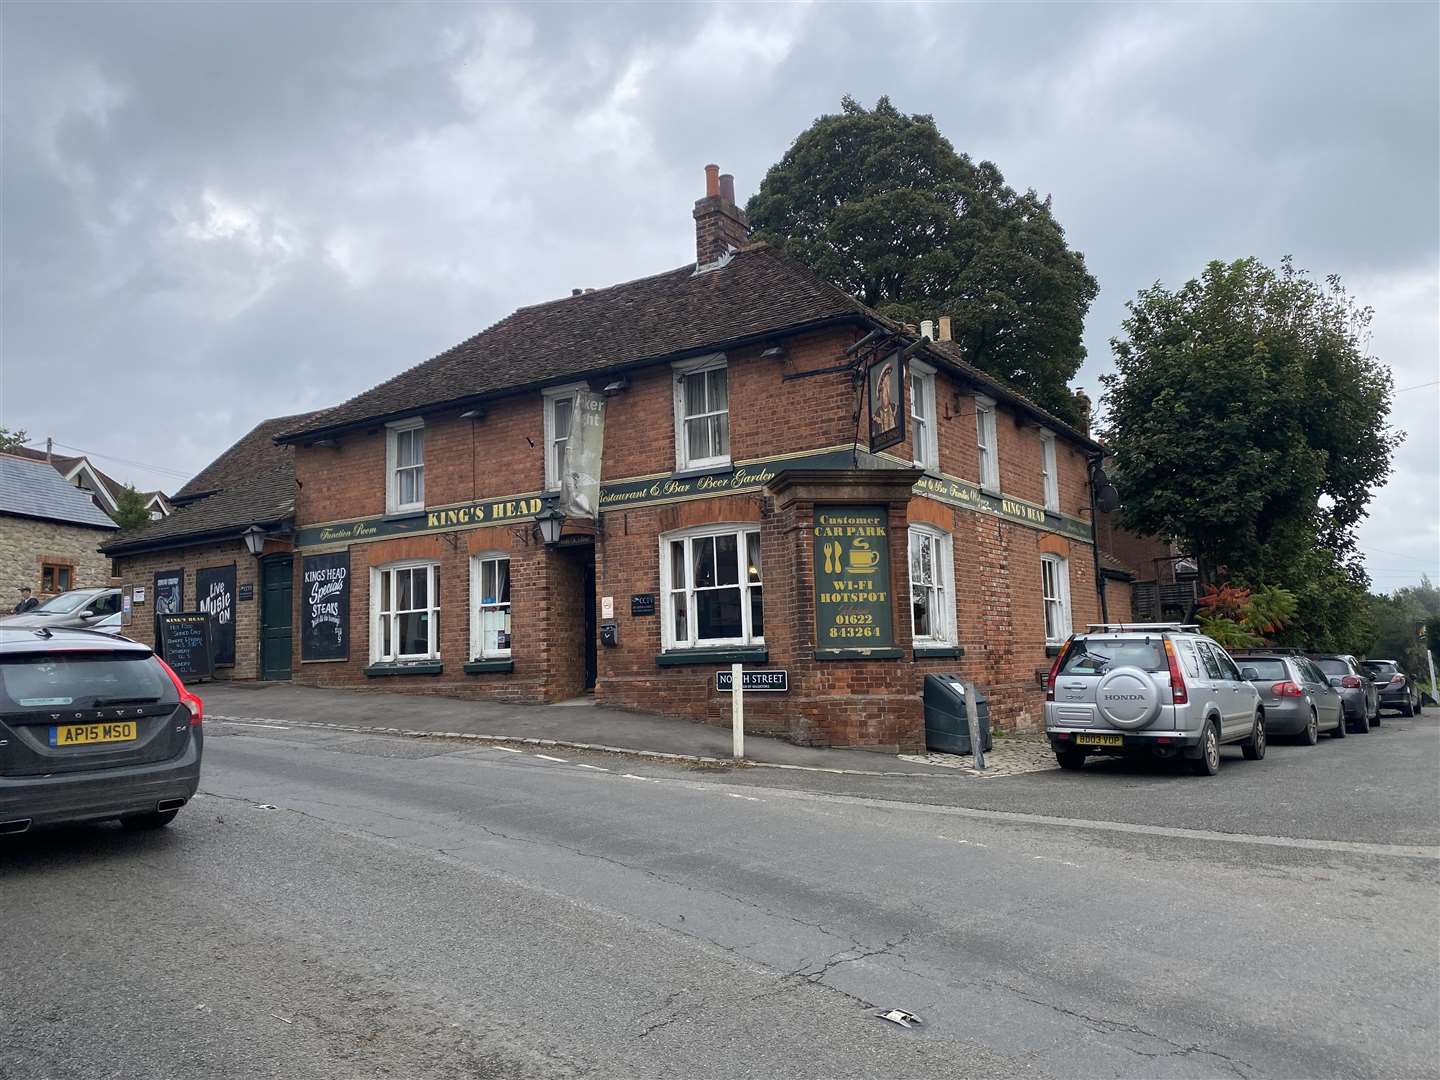 King's Head Sutton Valence. Picture: Zak Warwood